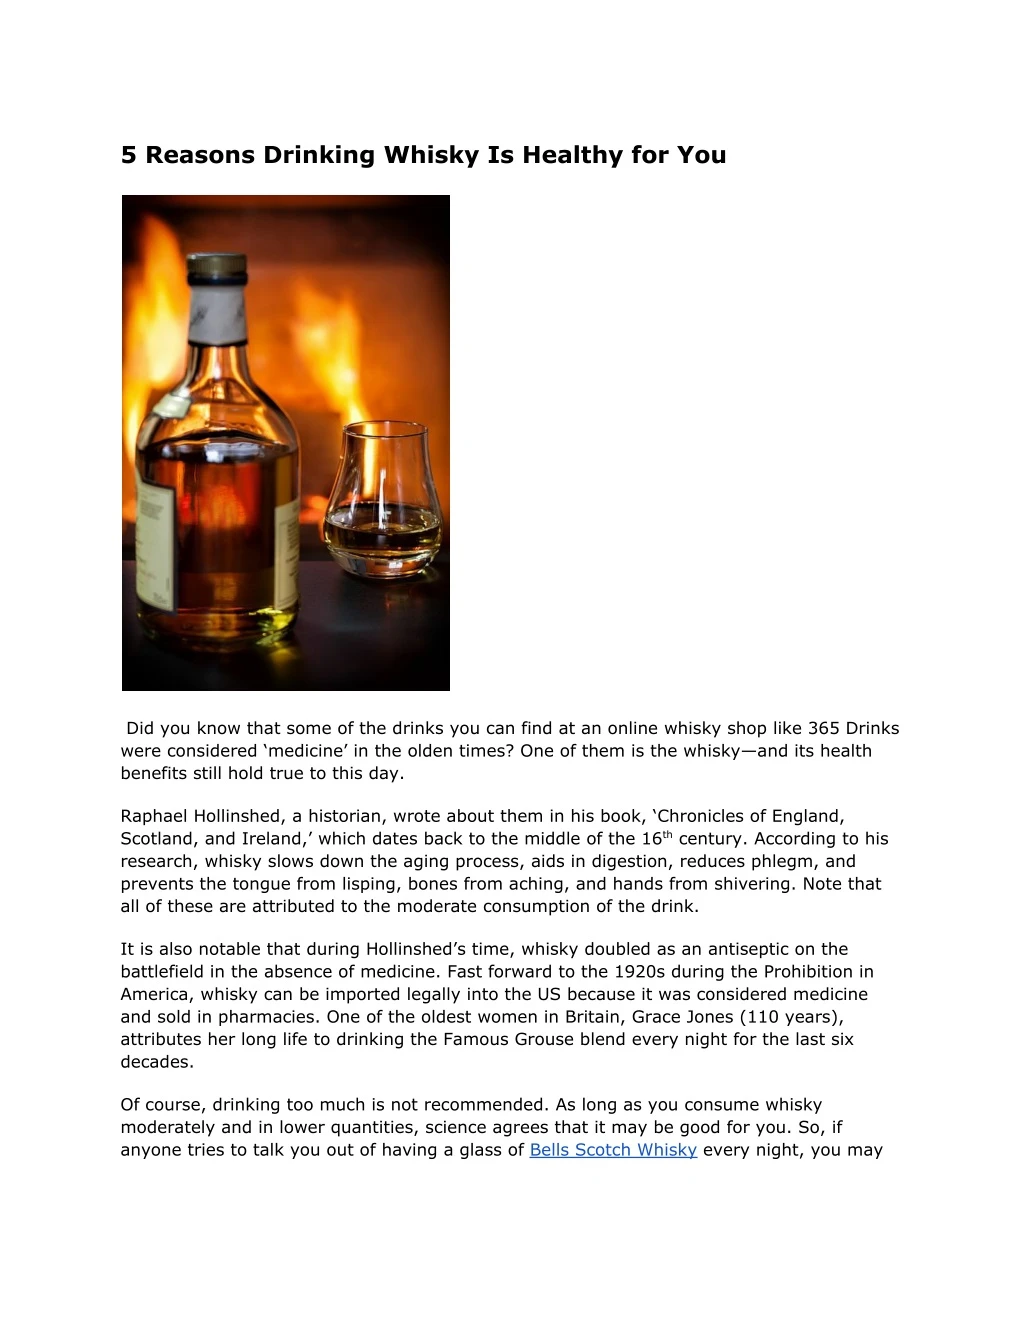 5 reasons drinking whisky is healthy for you